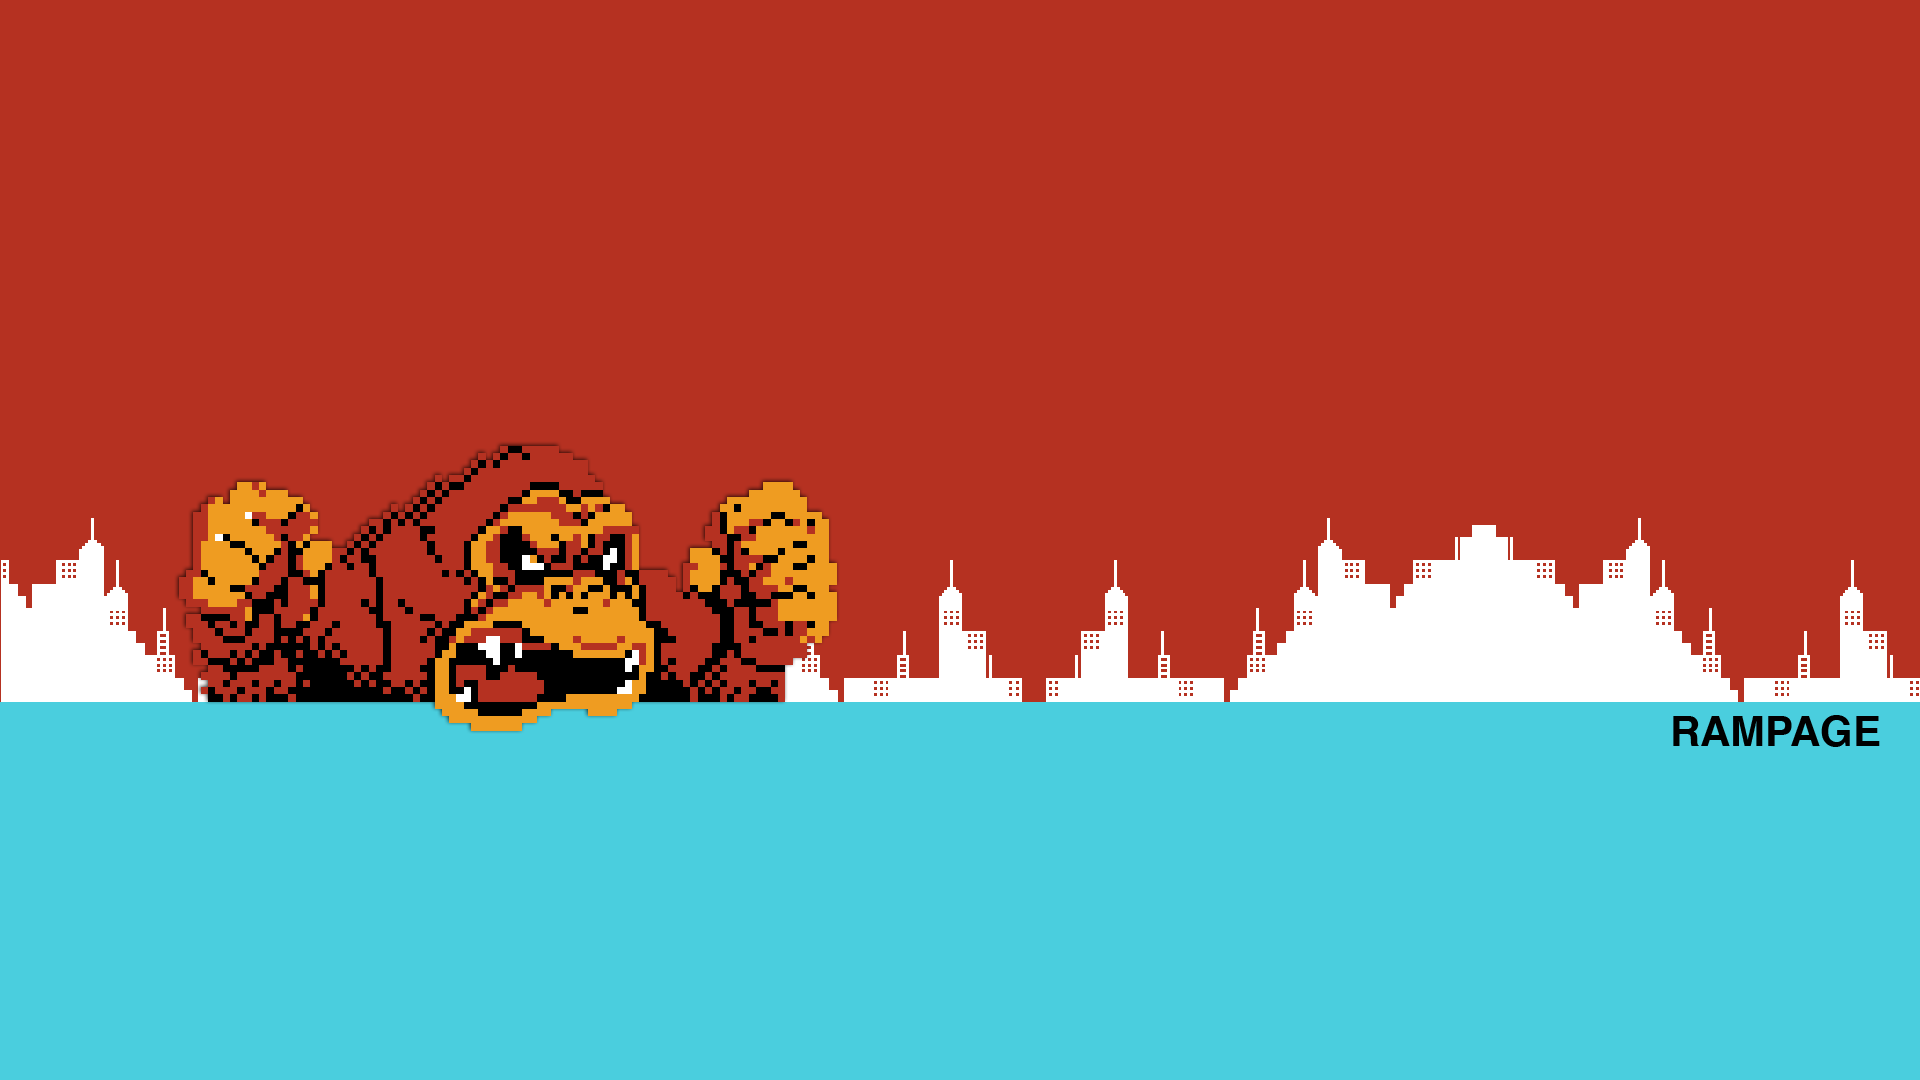 Video Game Rampage 1920x1080